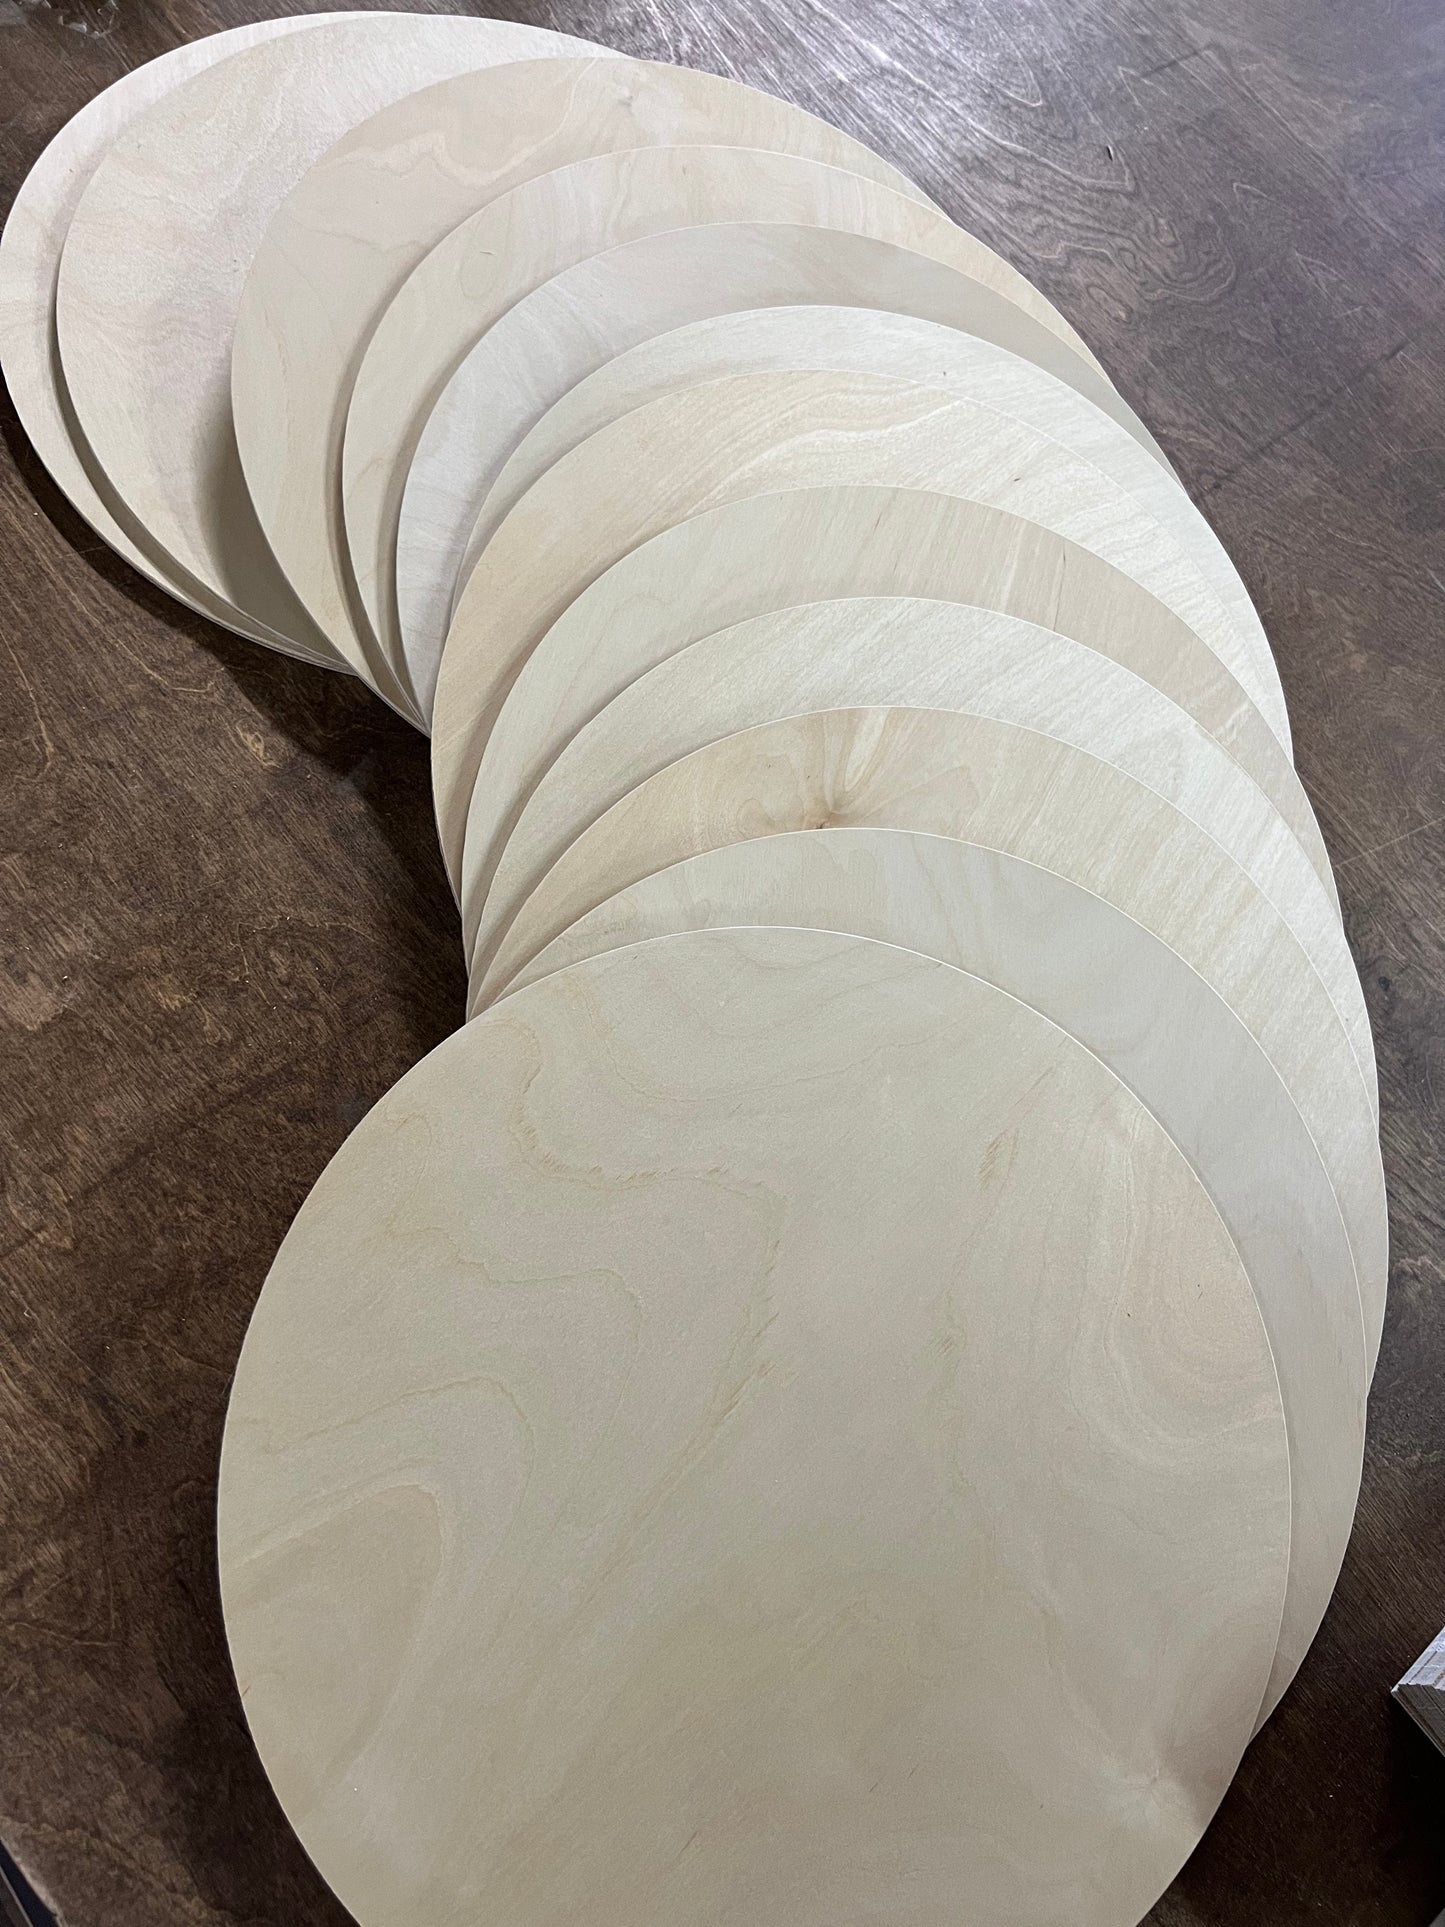 12 PACK OF 15INCH BIRCH ROUNDS